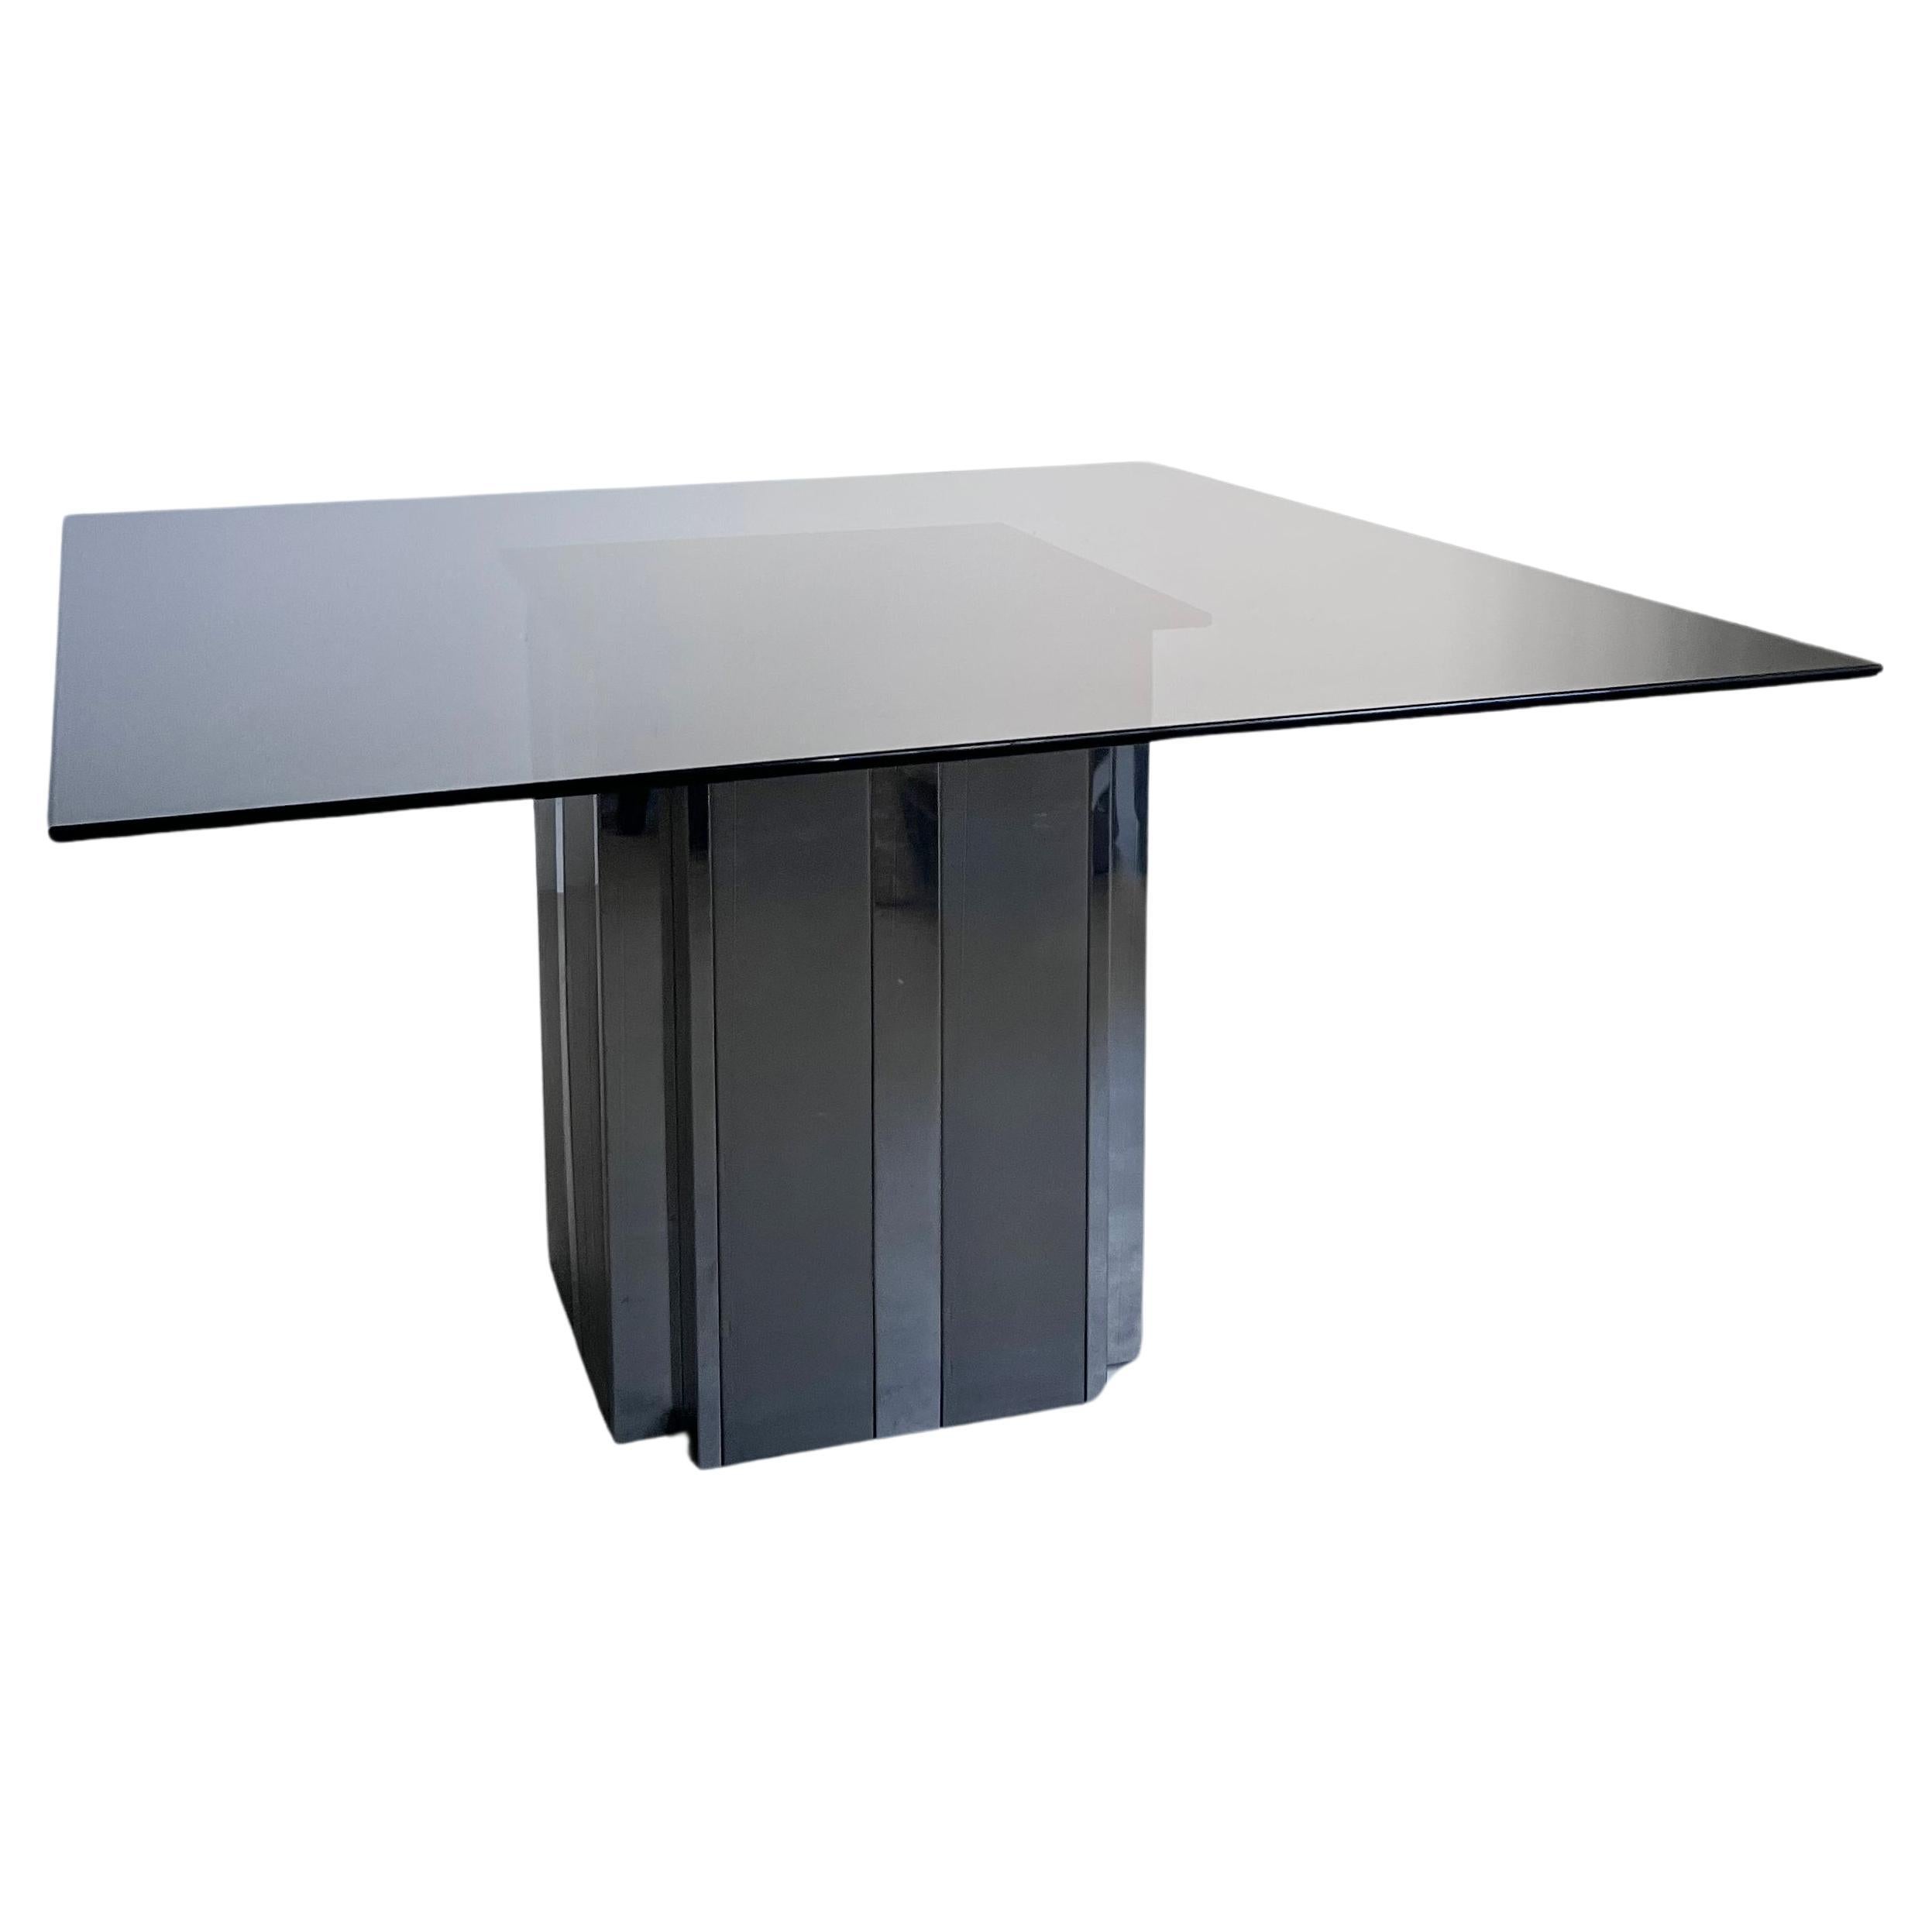 Square Dining Table in Metal and Smoked Glass, 1970's Paul Evans Style